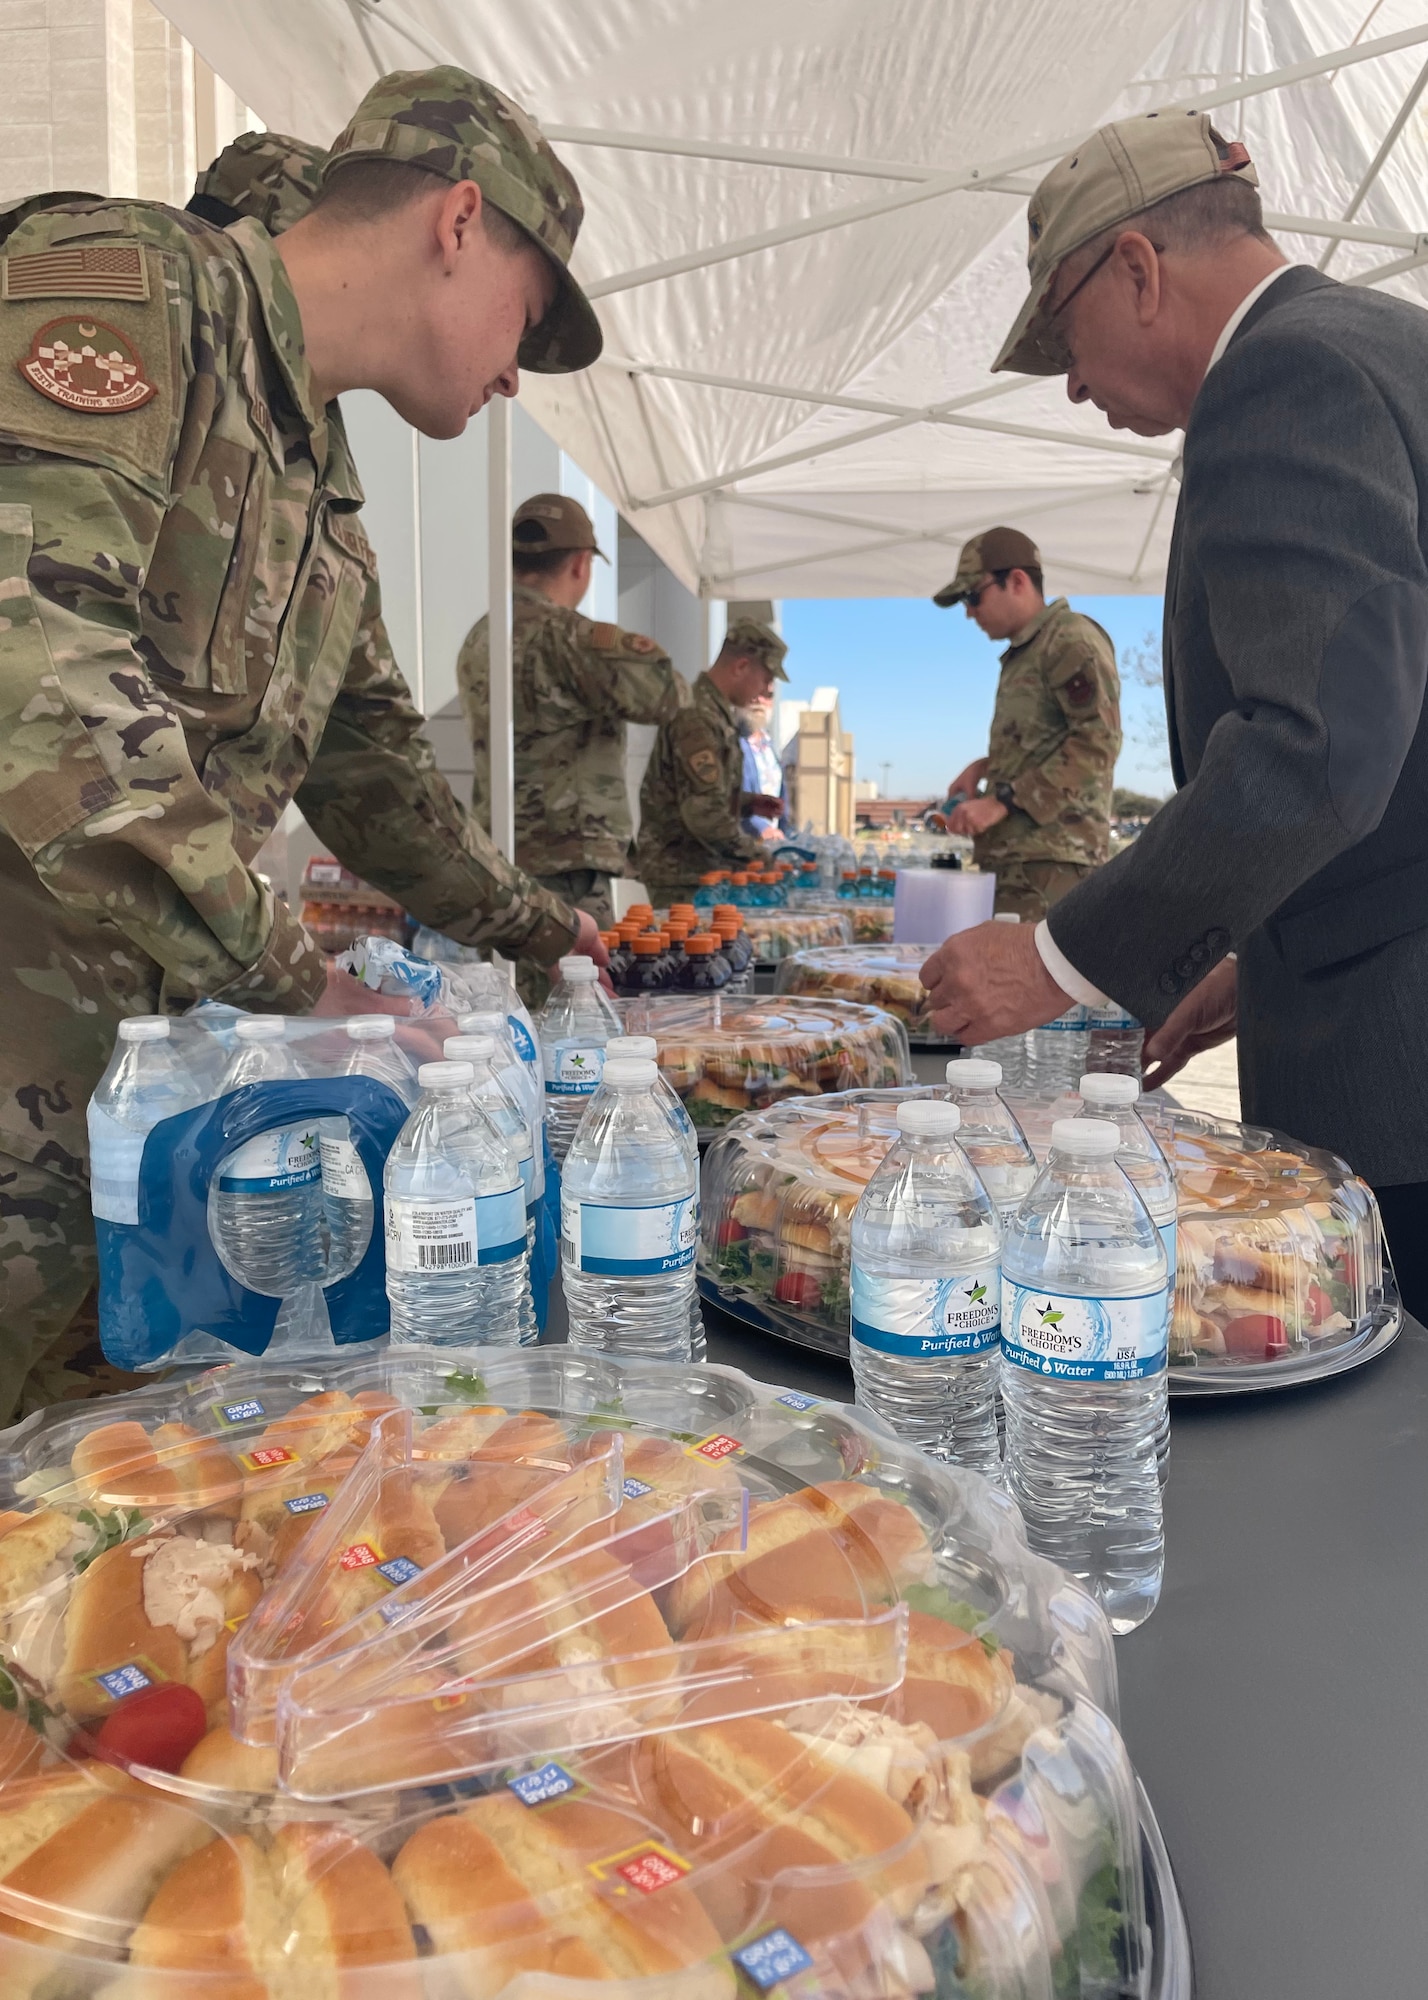 Service members assigned to the 17th Training Wing prepare refreshments for event attendees during the dedication of the Weyandt-Eddy Memorial Plaza at Goodfellow Air Force Base, Texas, March 25, 2022. The dedication was held  to remember the heritage and uphold the legacy of past and current intelligence missions fueled by 17th TRW personnel. (U.S. Air Force photo by Senior Airman Abbey Rieves)